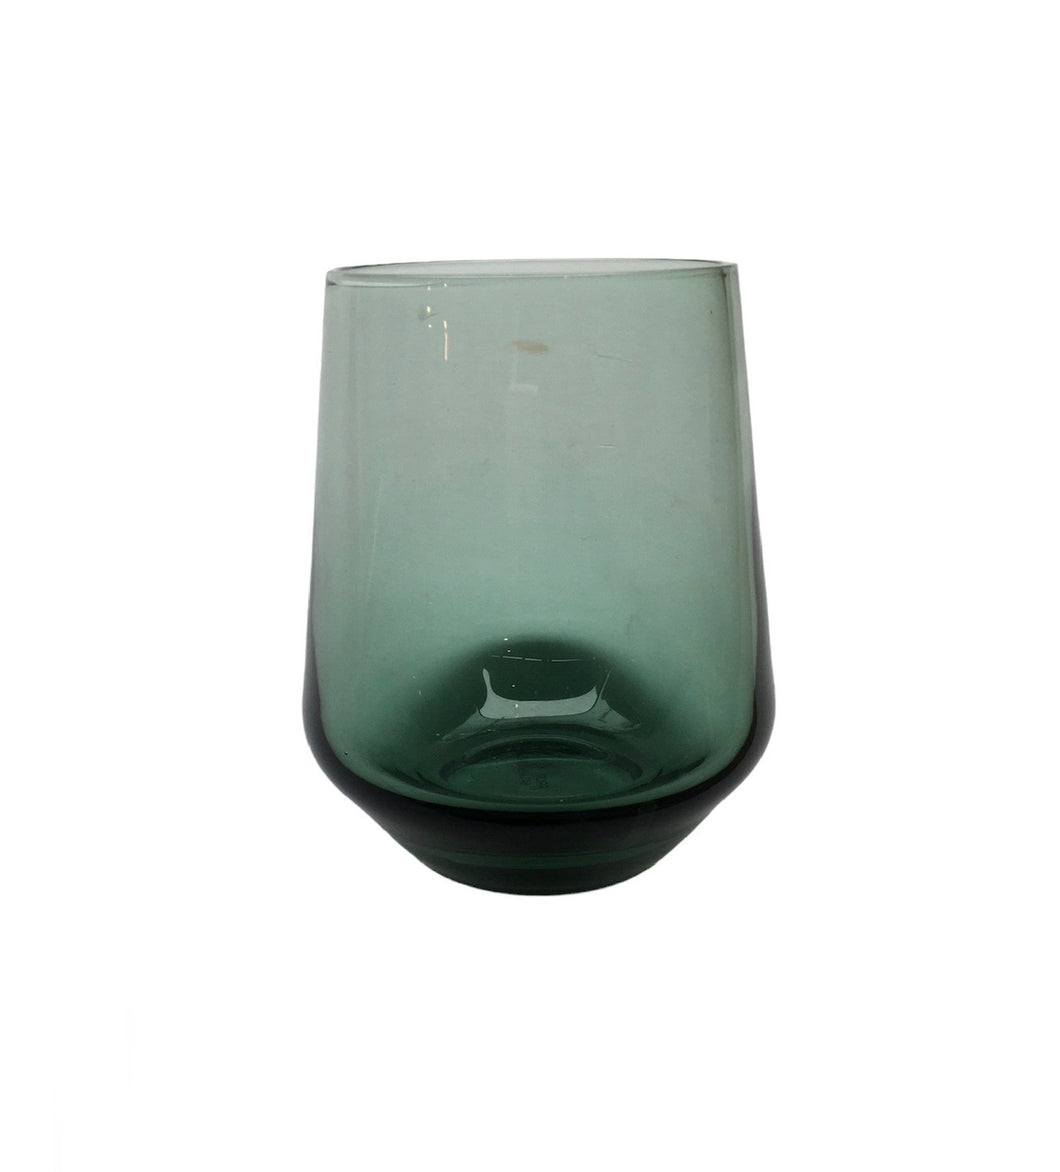 Green drinking glass 4.5inches, Quantity 2)